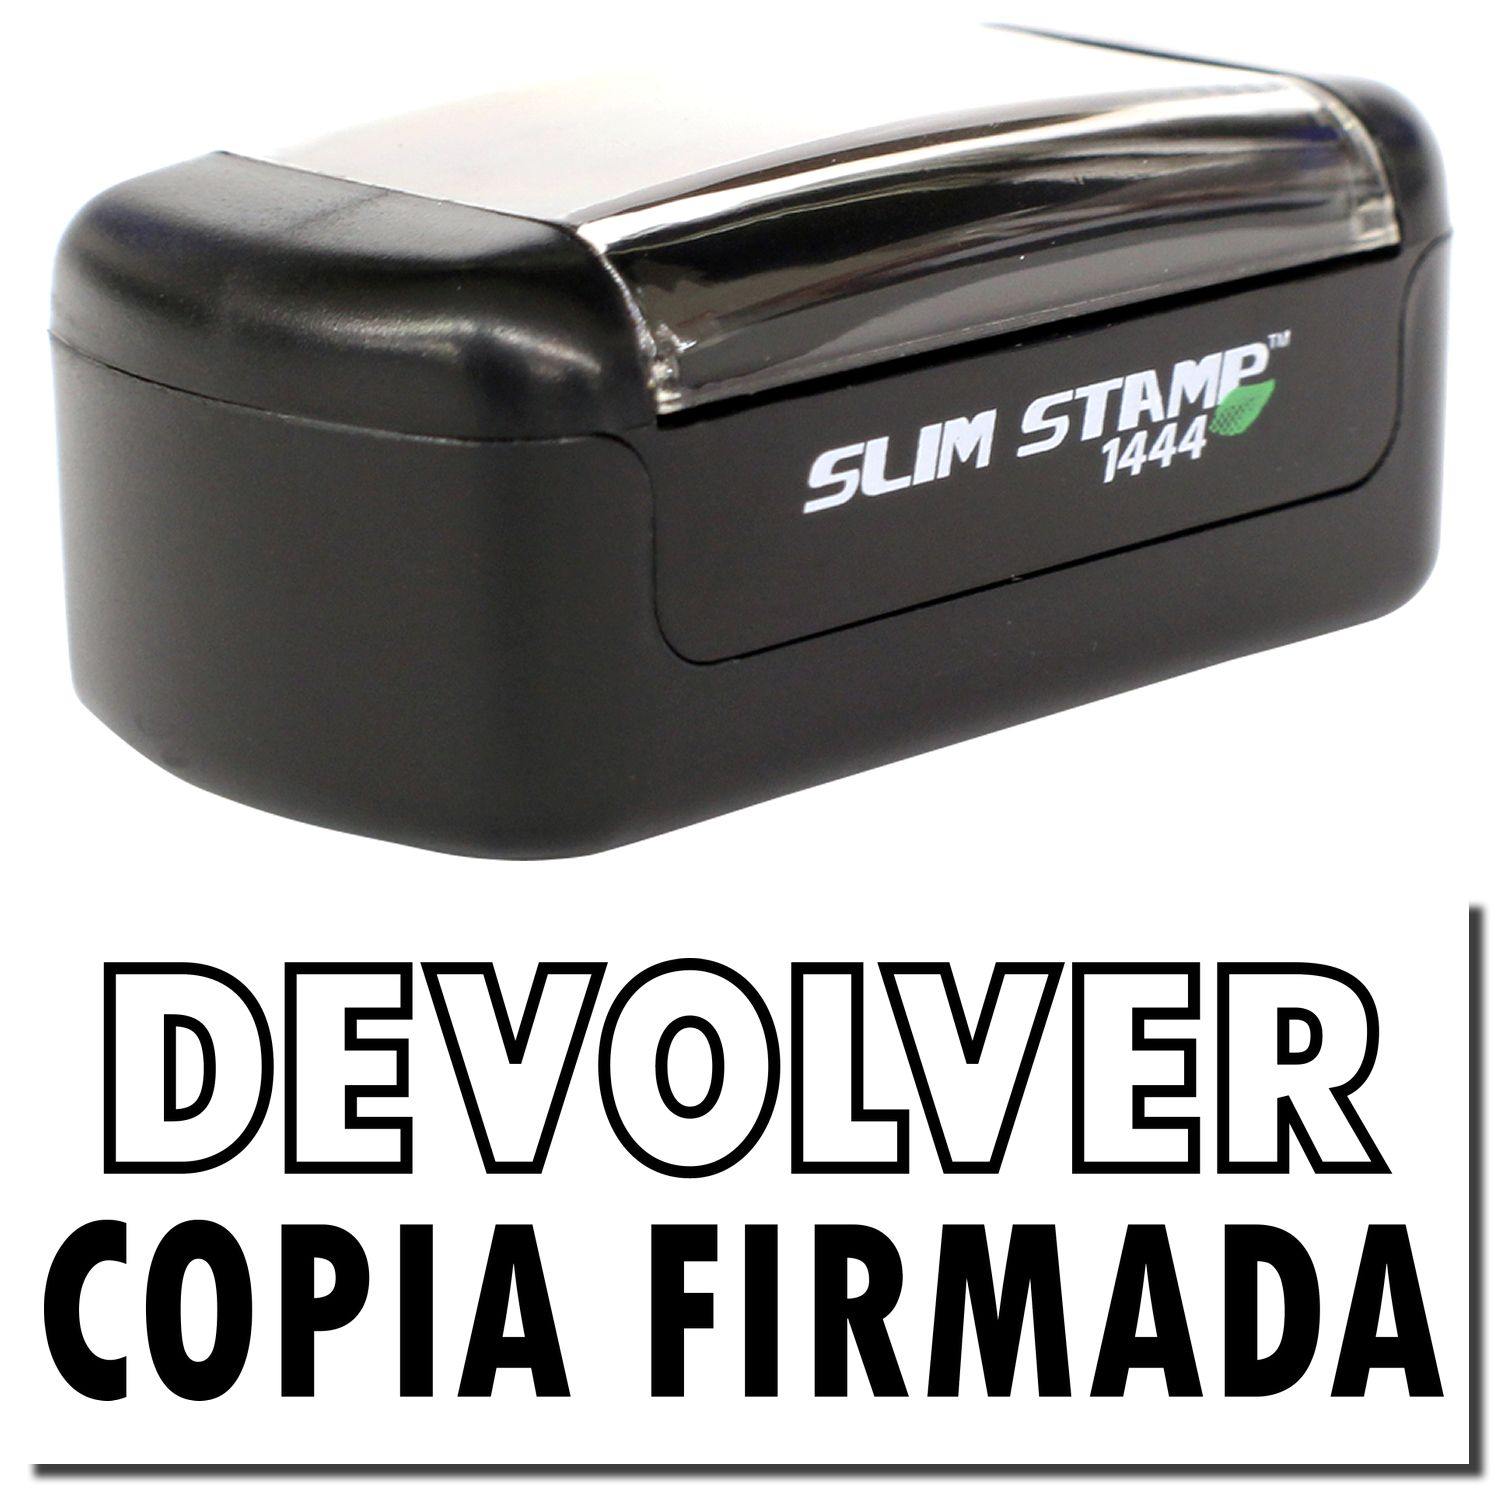 A stock office pre-inked stamp with a stamped image showing how the text "DEVOLVER COPIA FIRMADA" is displayed after stamping.